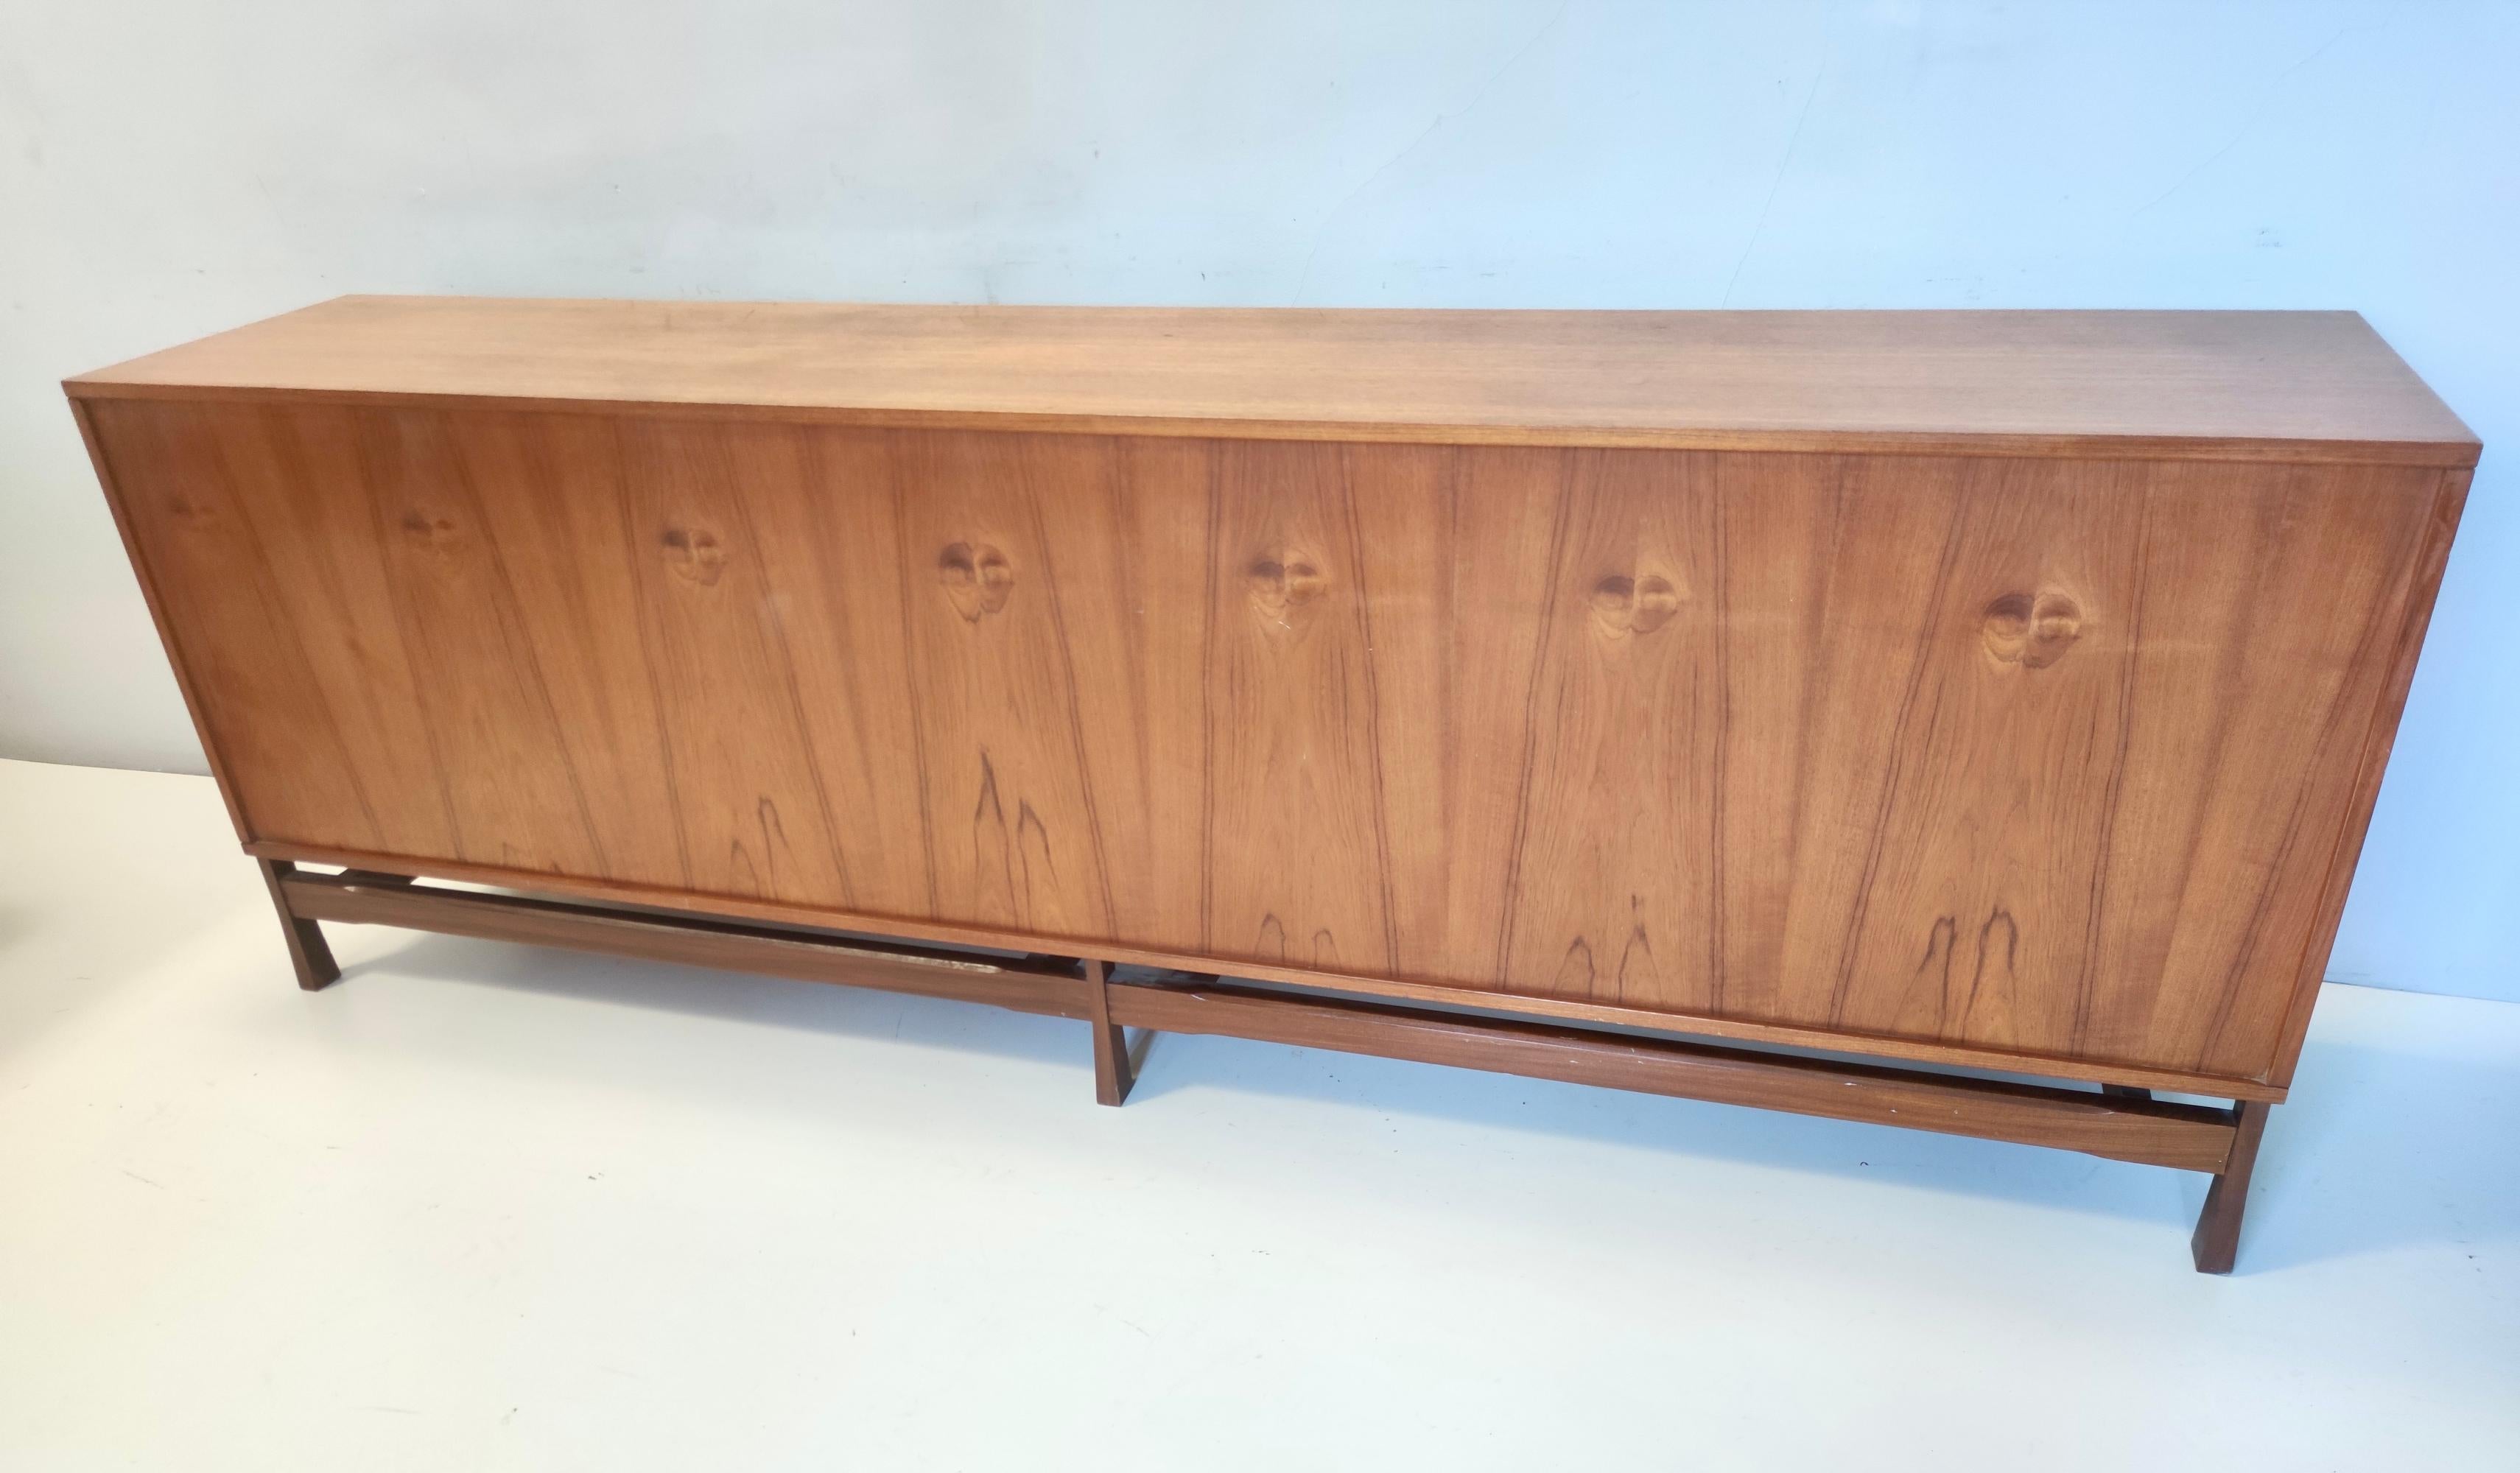 Postmodern Walnut Sideboard Produced by Saima, Pavia, Italy In Good Condition For Sale In Bresso, Lombardy